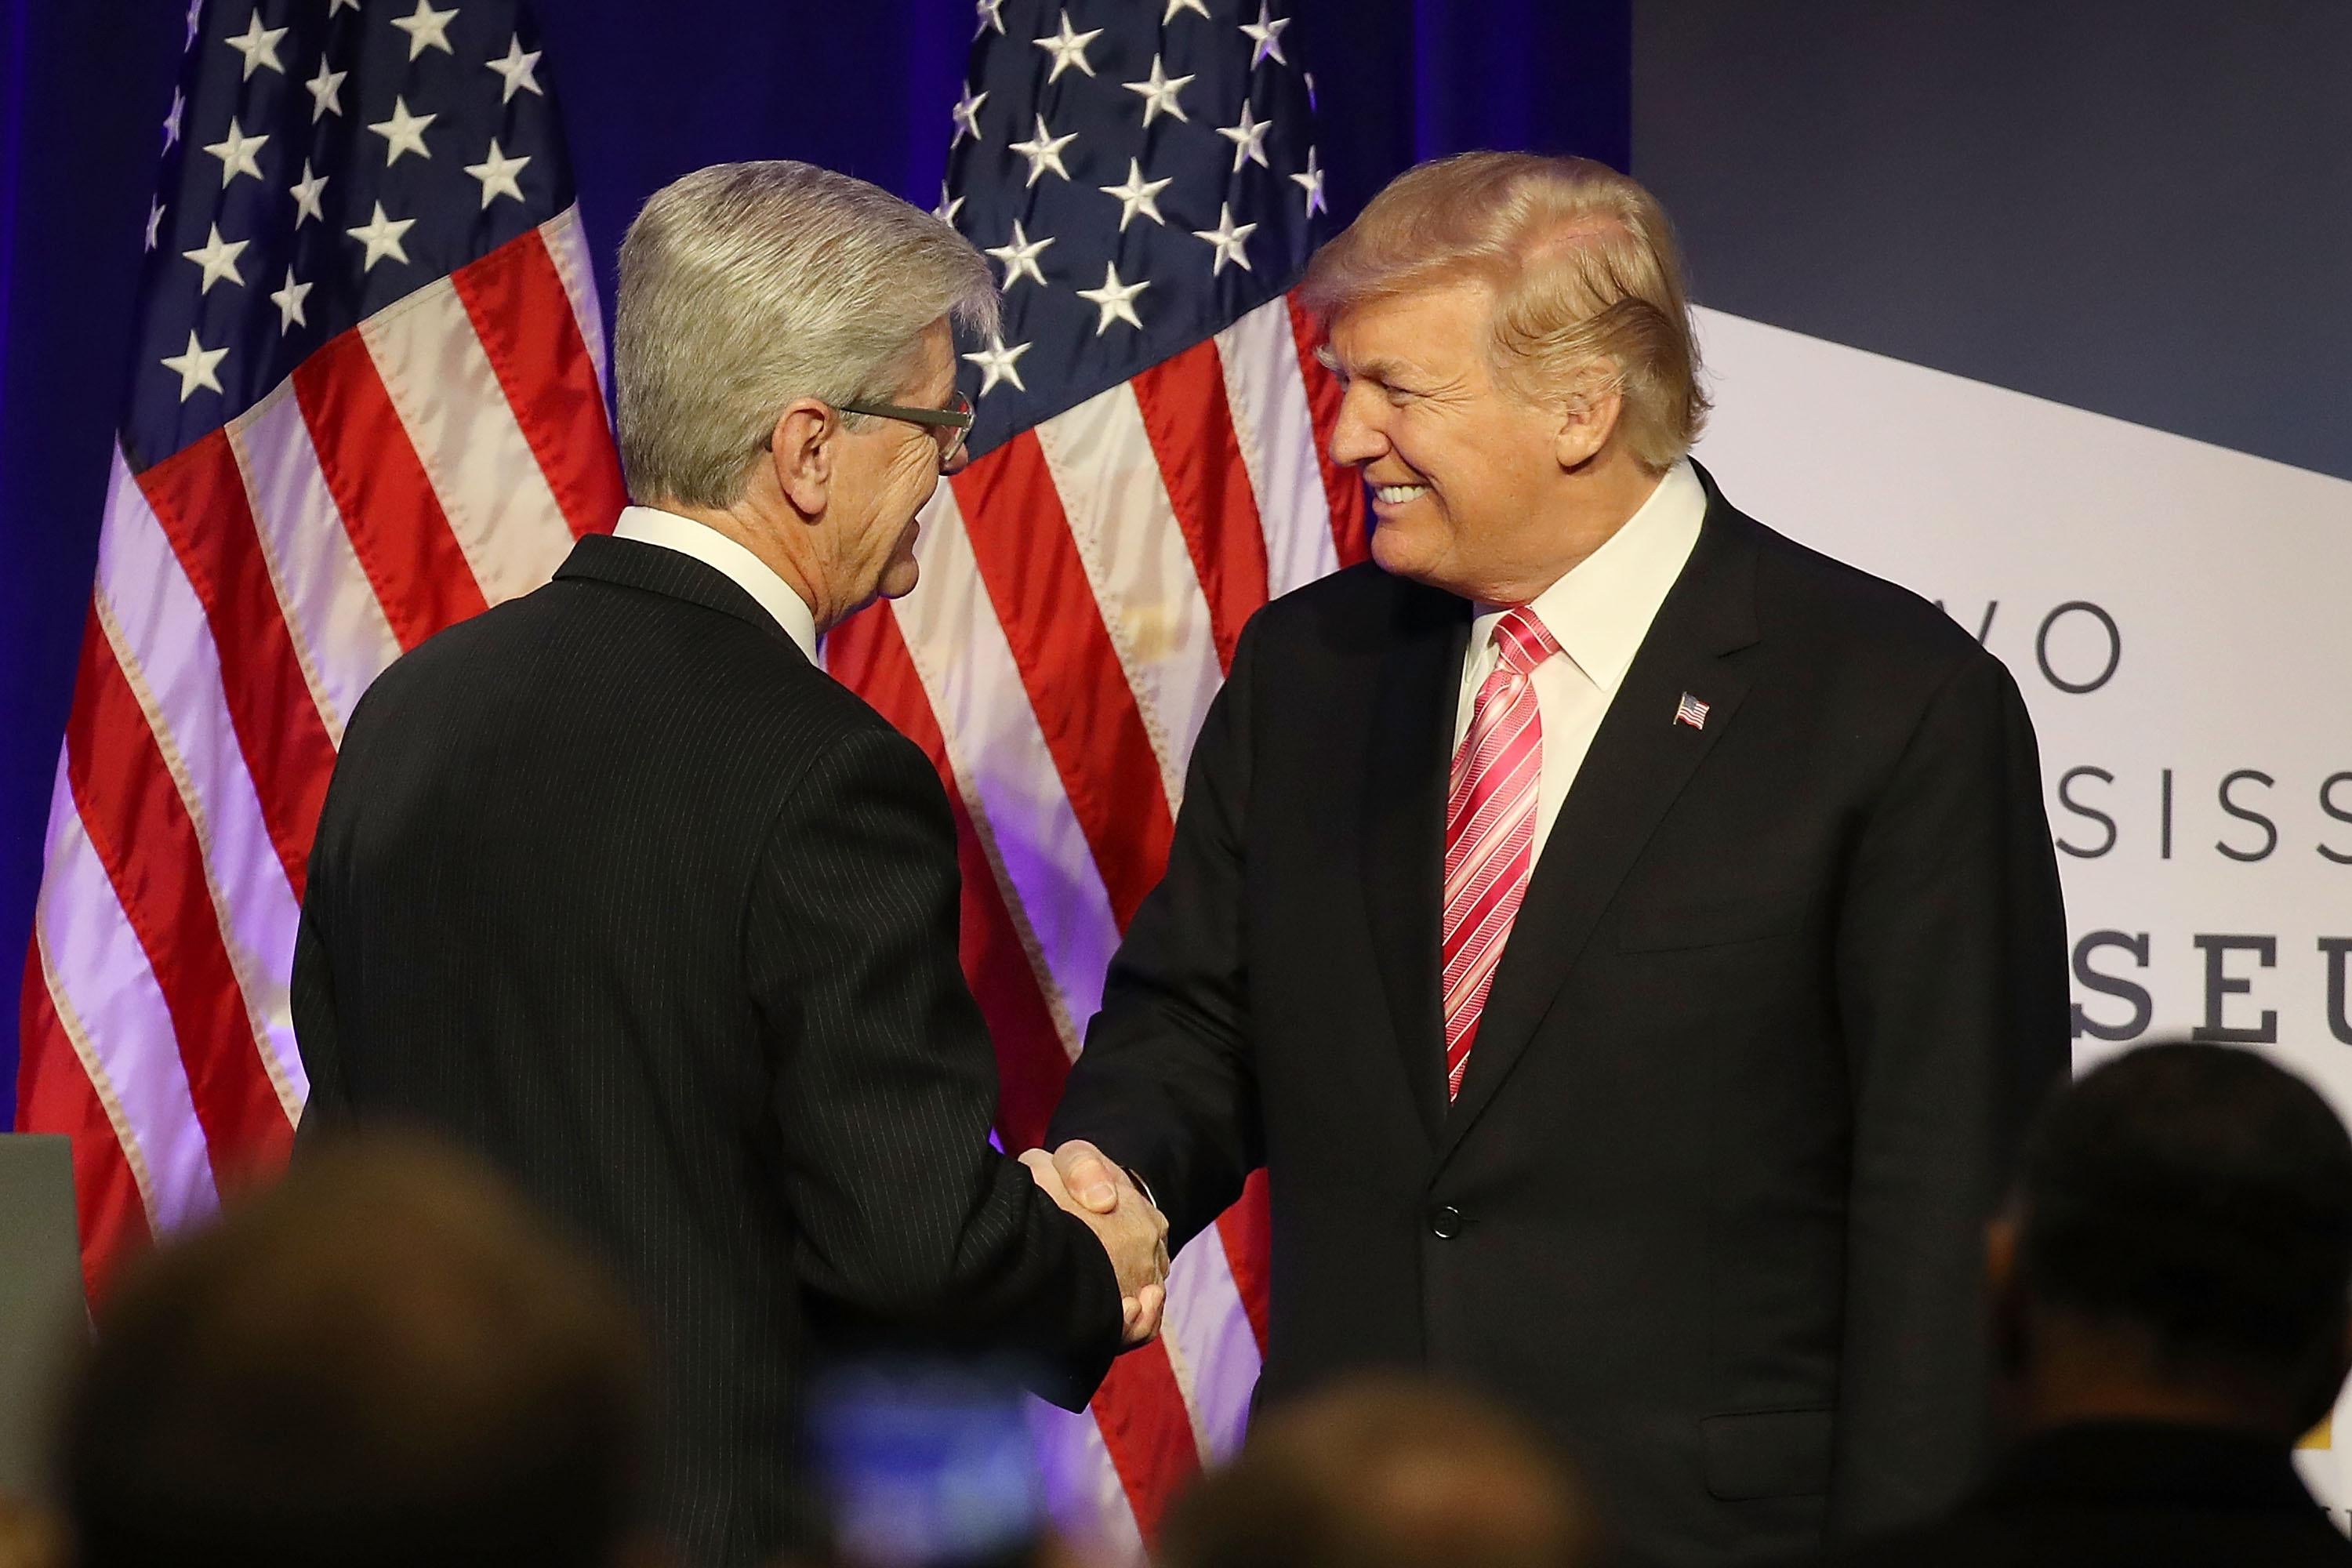 JACKSON, MS - DECEMBER 09:  President Donald Trump is introduced by  Mississippi Governor Phil Bryant to speak after touring the Mississippi Civil Rights Museum on December 9, 2017 in Jackson, Mississippi. The museum had a grand opening event with hopes to promote a greater understanding of the Mississippi Civil Rights Movement and its impact by highlighting the strength and sacrifices of its people.  (Photo by Joe Raedle/Getty Images)